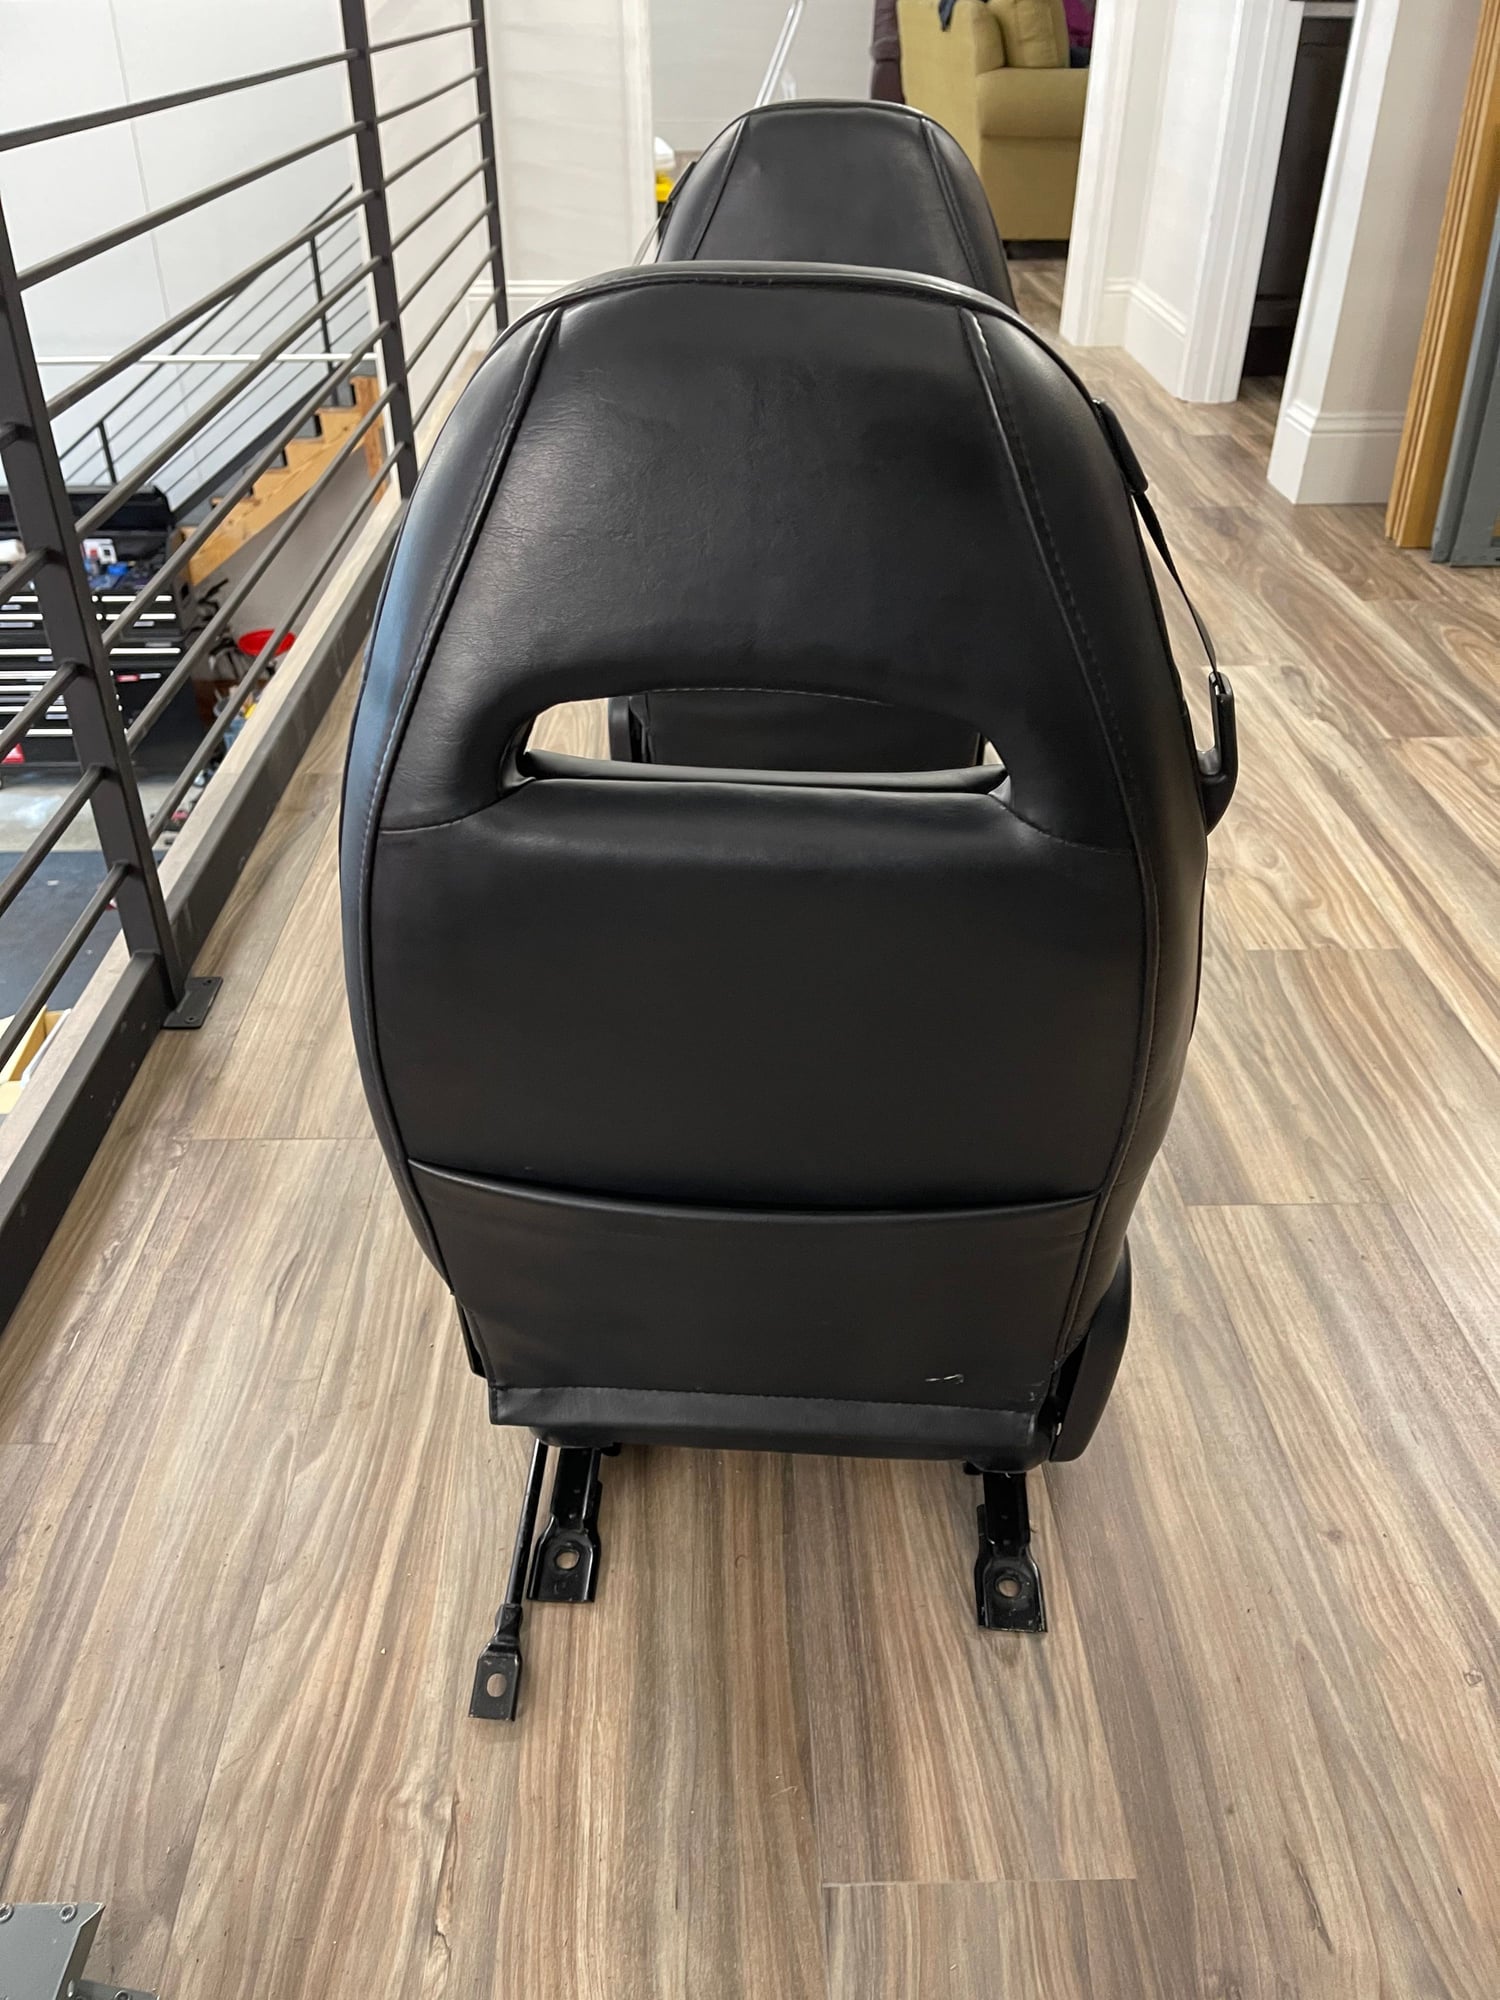 Interior/Upholstery - Black Touring Seats / Very nice condition OEM - Used - 1993 to 2002 Mazda RX-7 - Allen, TX 75013, United States